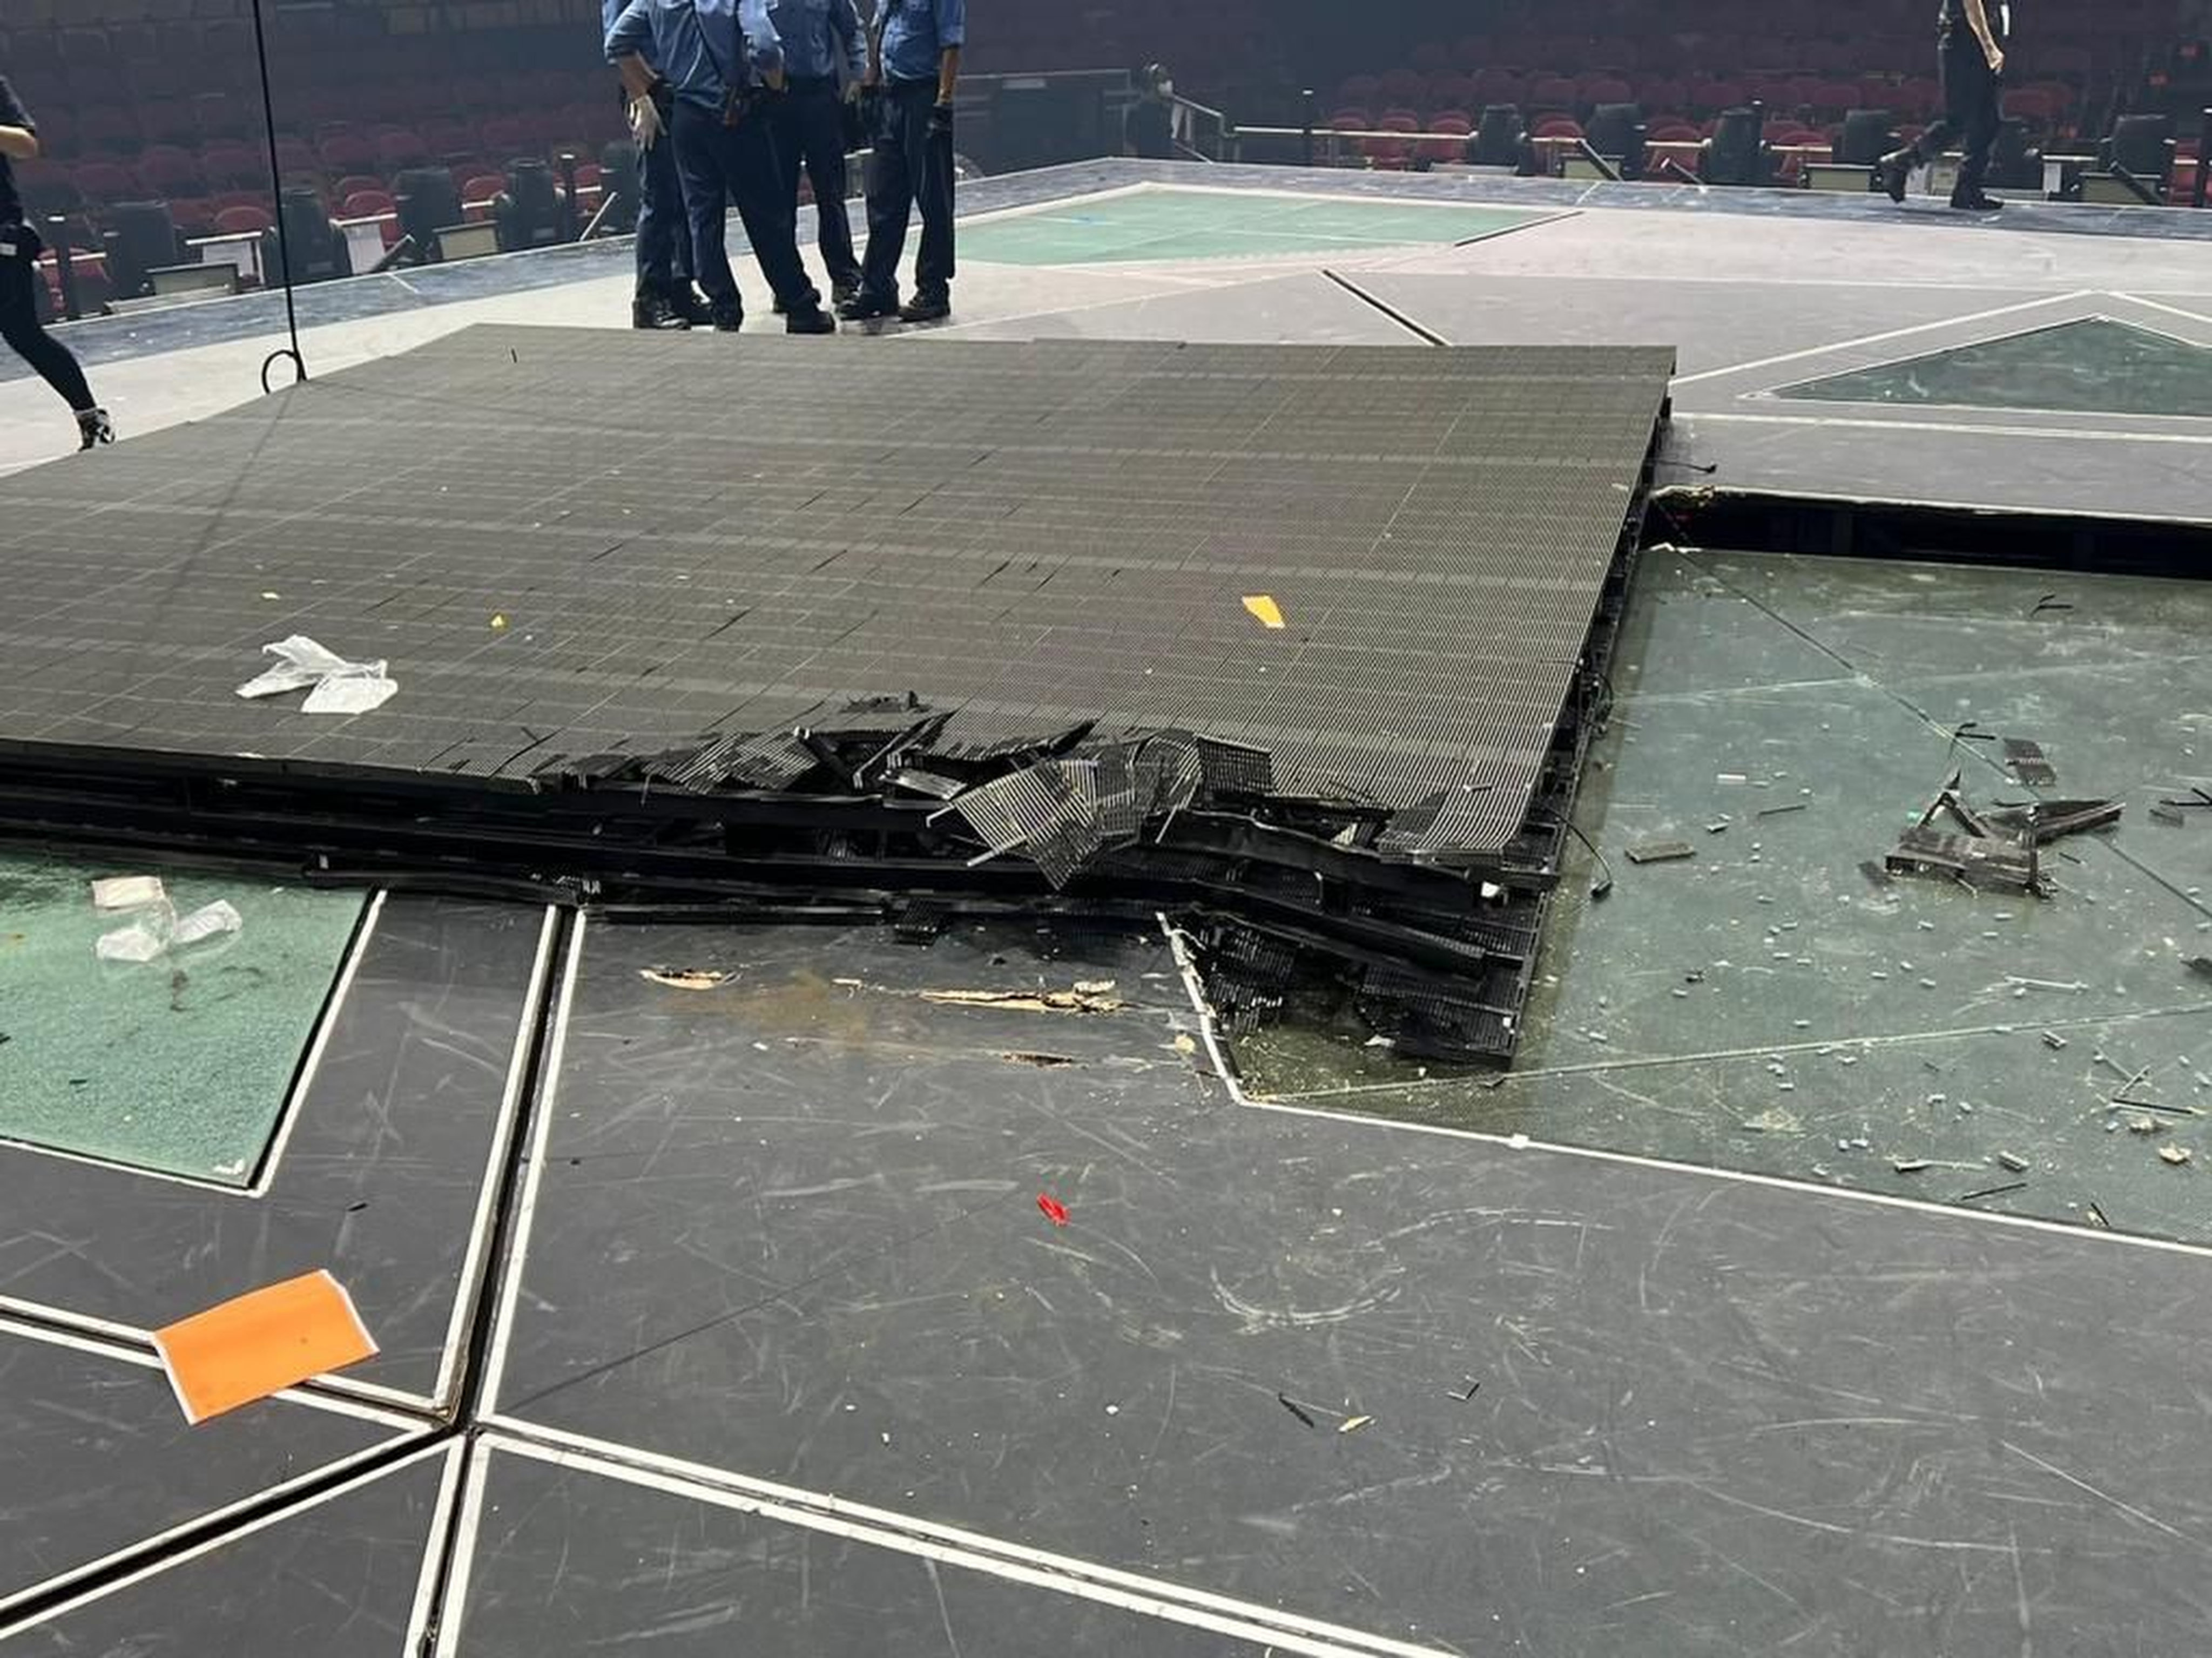 The aftermath of the accident in July at the Hong Kong Coliseum. Photo: Handout